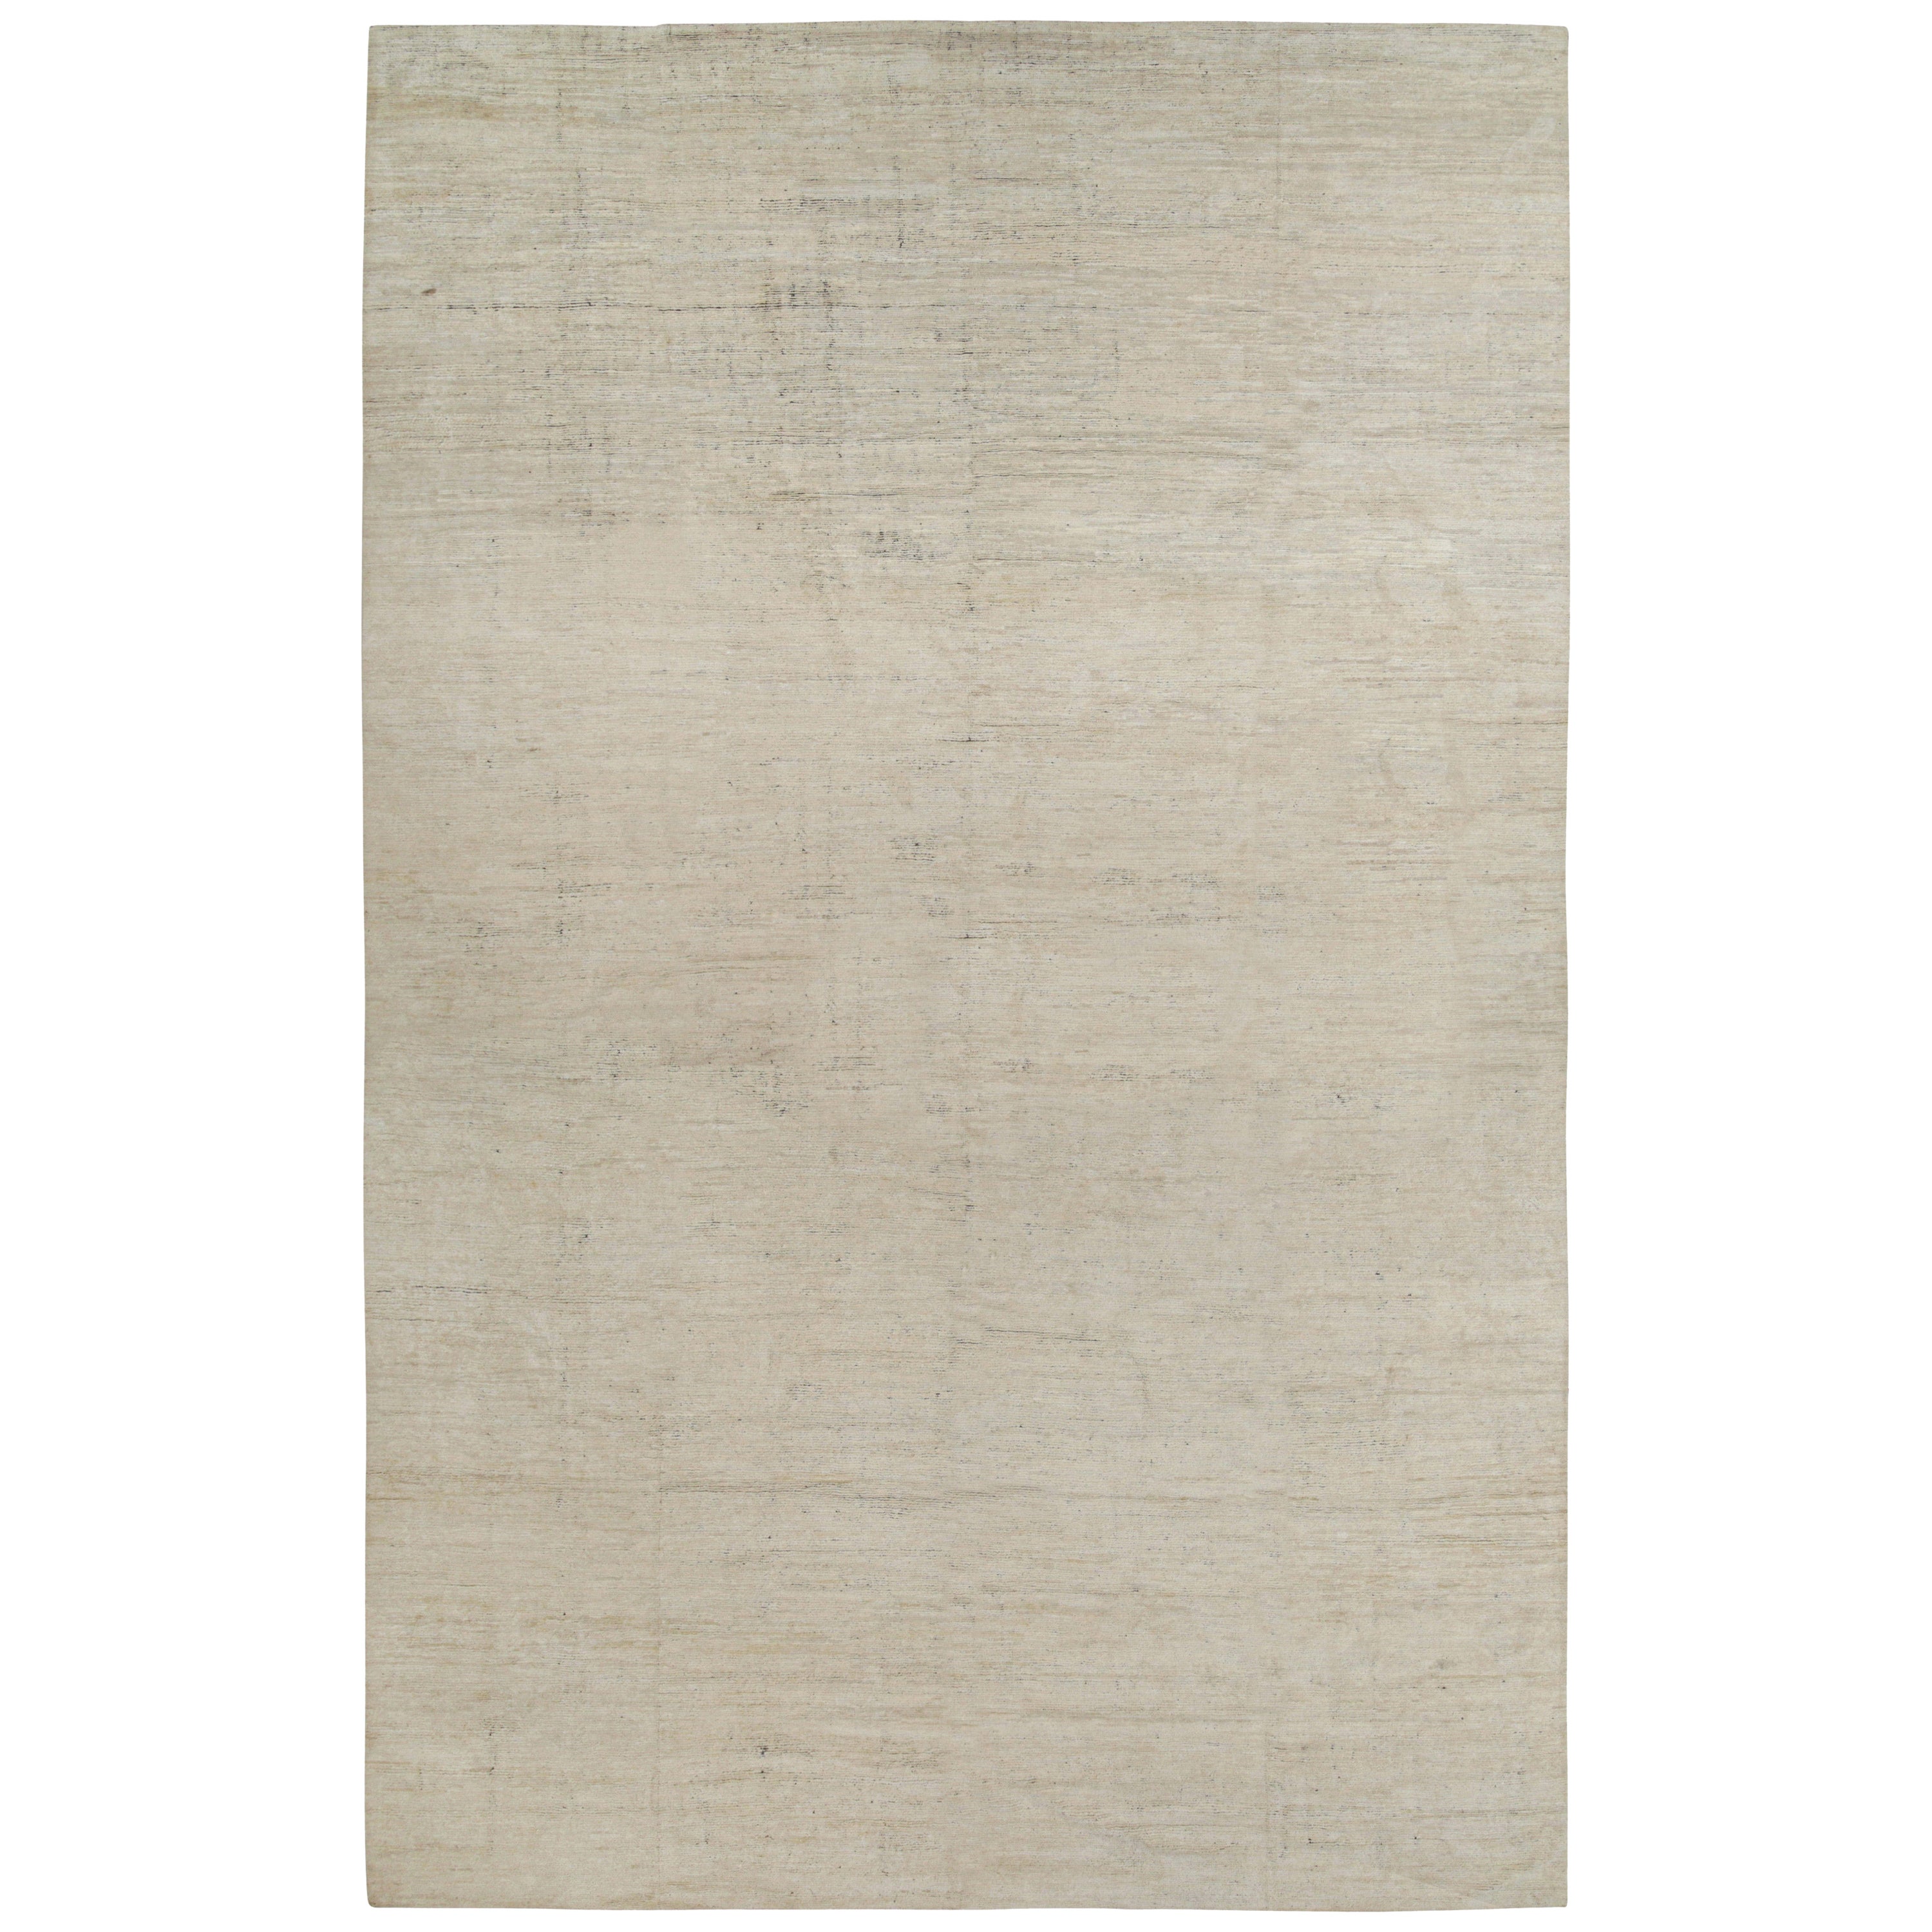 This 15x24 rug is a grand new entry to Rug & Kilim’s Texture of Color Collection. Hand-knotted in wool, silk, and cotton.
Further on the Design:
The collection enjoys an inventive take on plain rugs, and a patternless take on pattern in